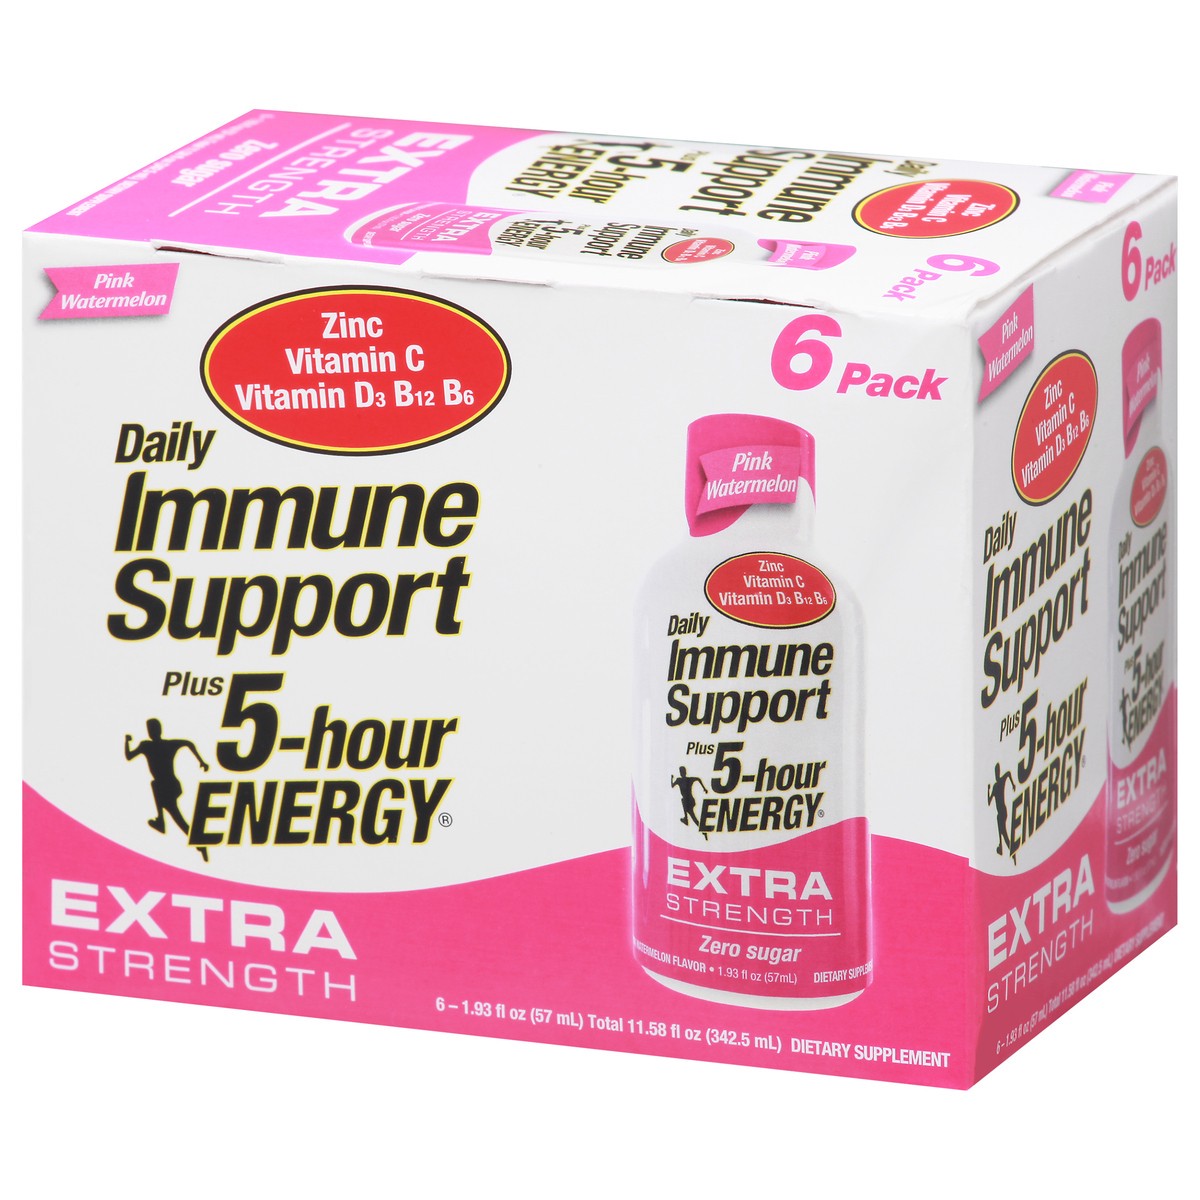 slide 13 of 14, 5-Hour Energy 6 Pack Extra Strength Pink Watermelon Daily Immune Support 6 1.93 fl oz 6 ea Box, 1.93 oz